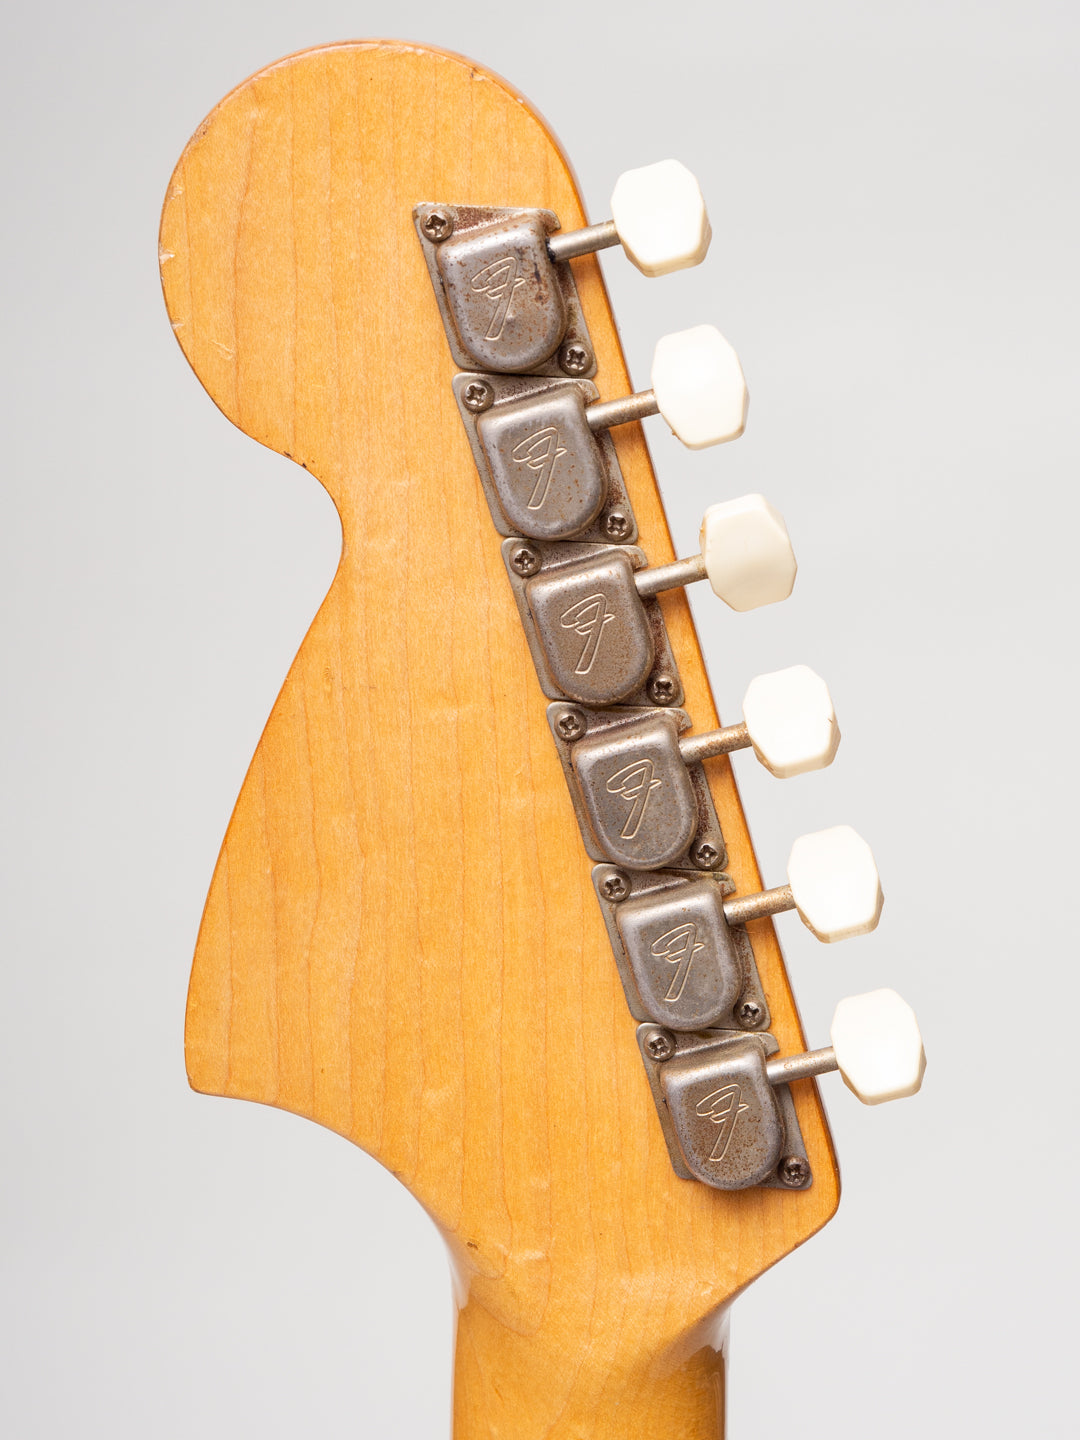 1968 Fender Competition Mustang